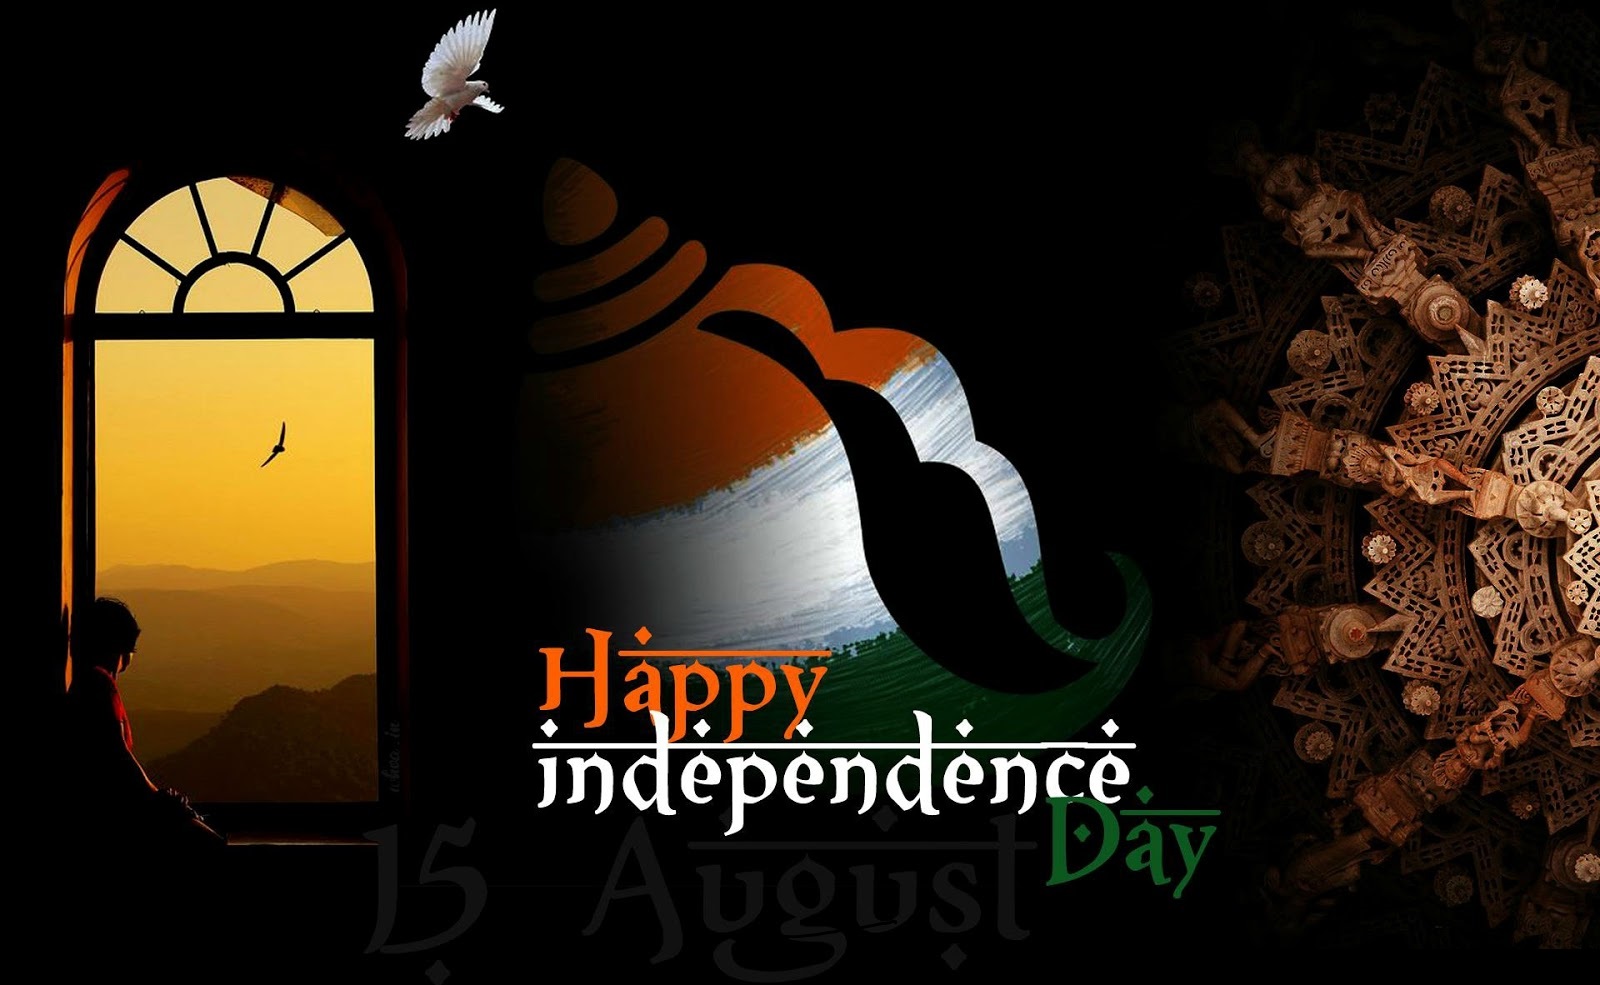 Independence Day Archives - Whatsapp Lover